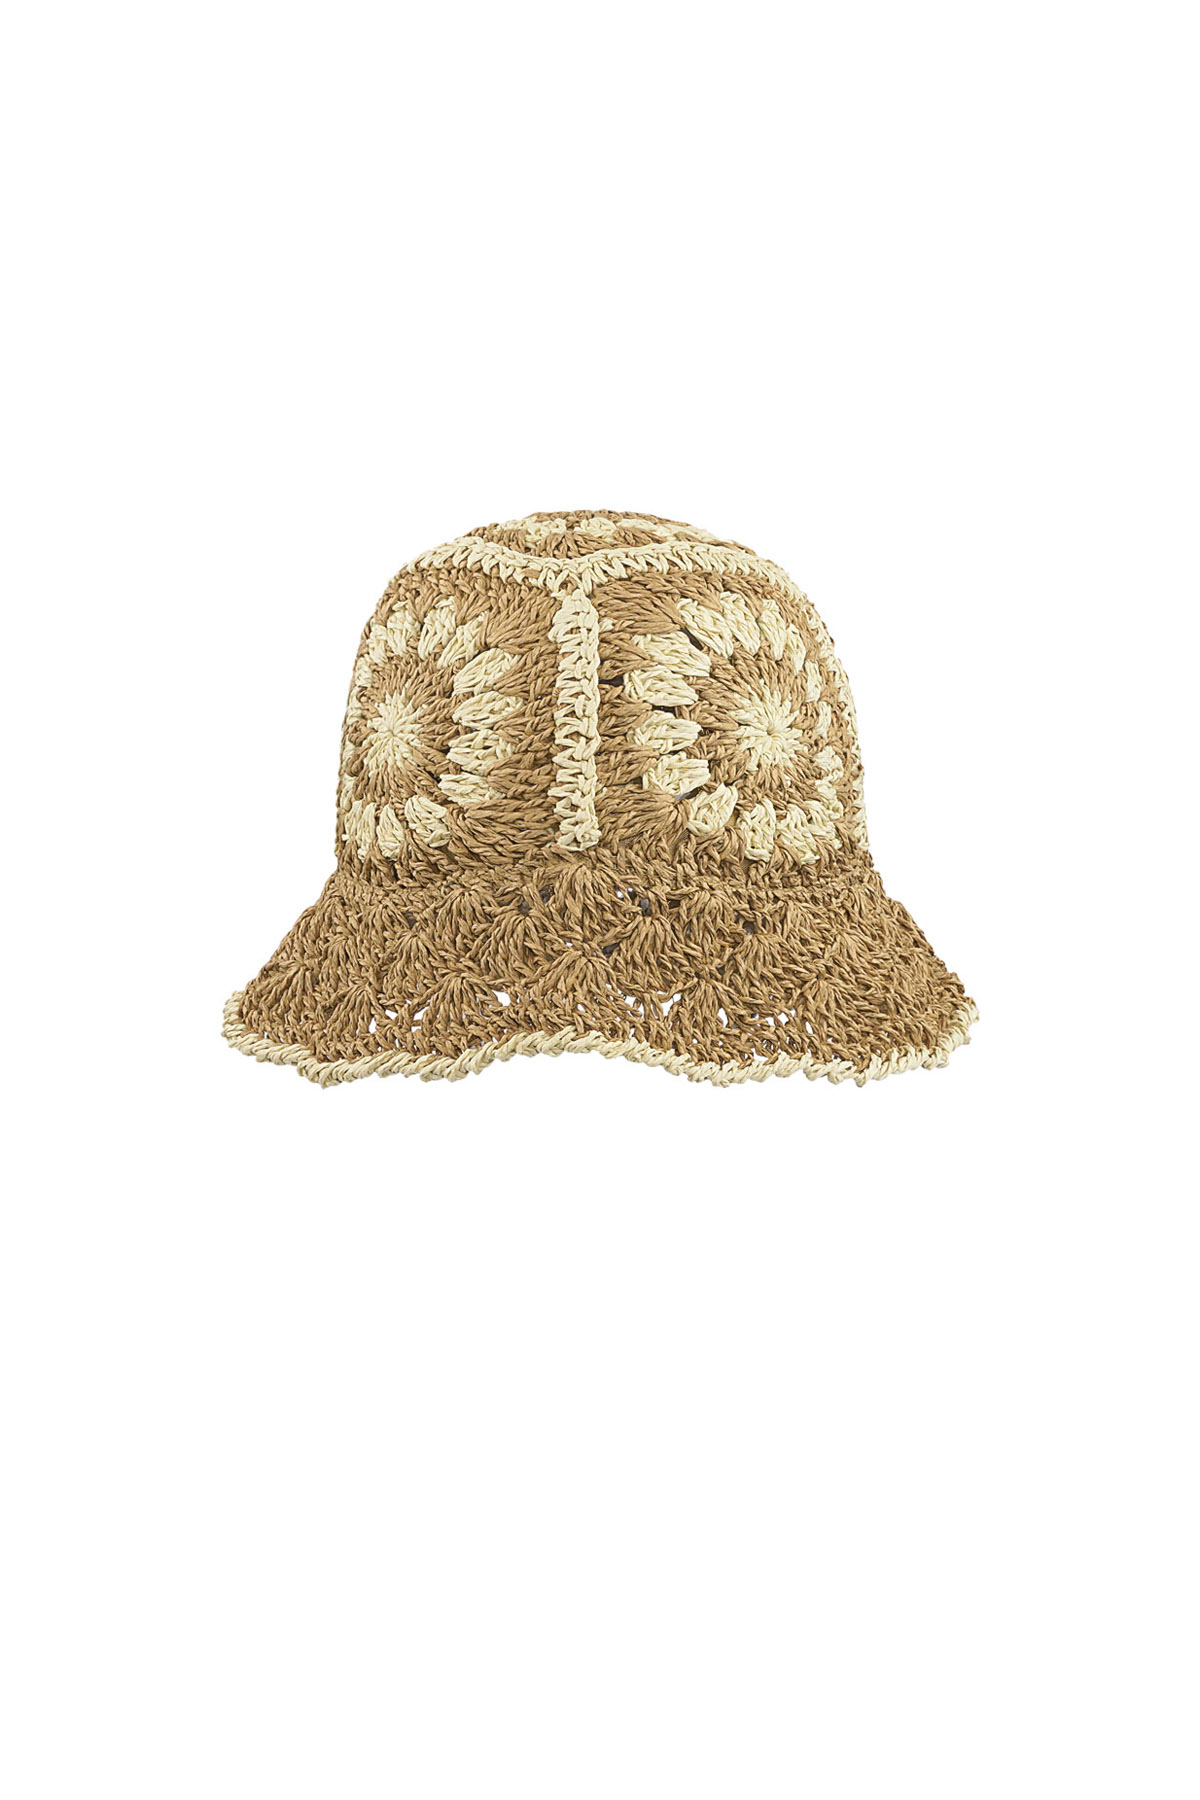 Crochet hat with flowers - camel